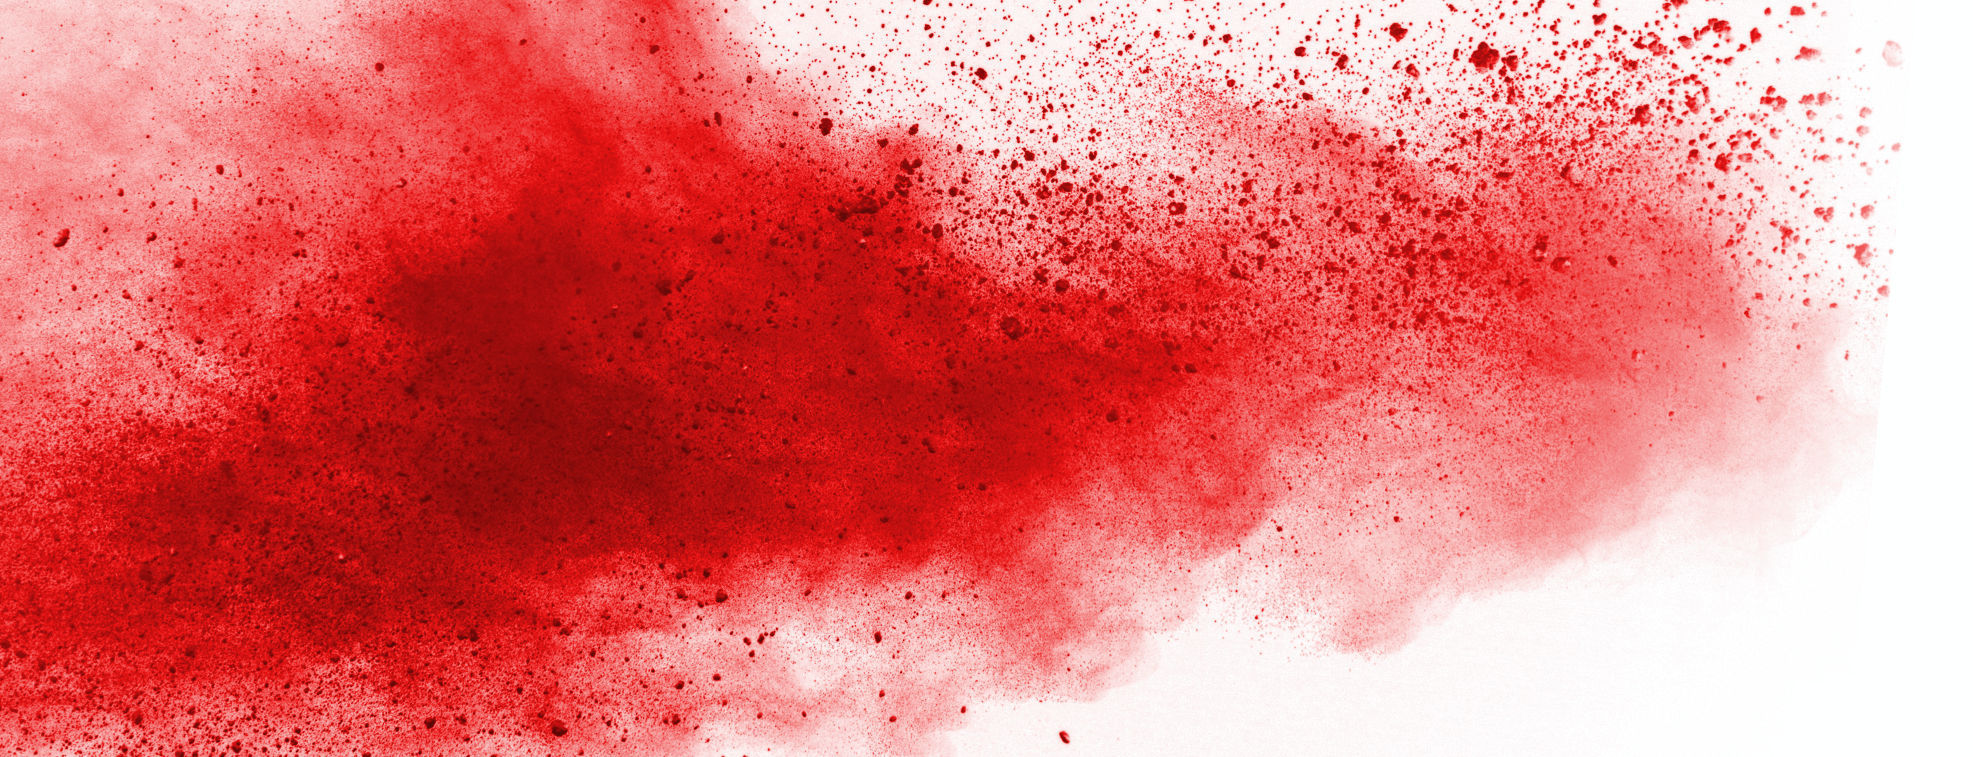 Bright red color paint spread over white background